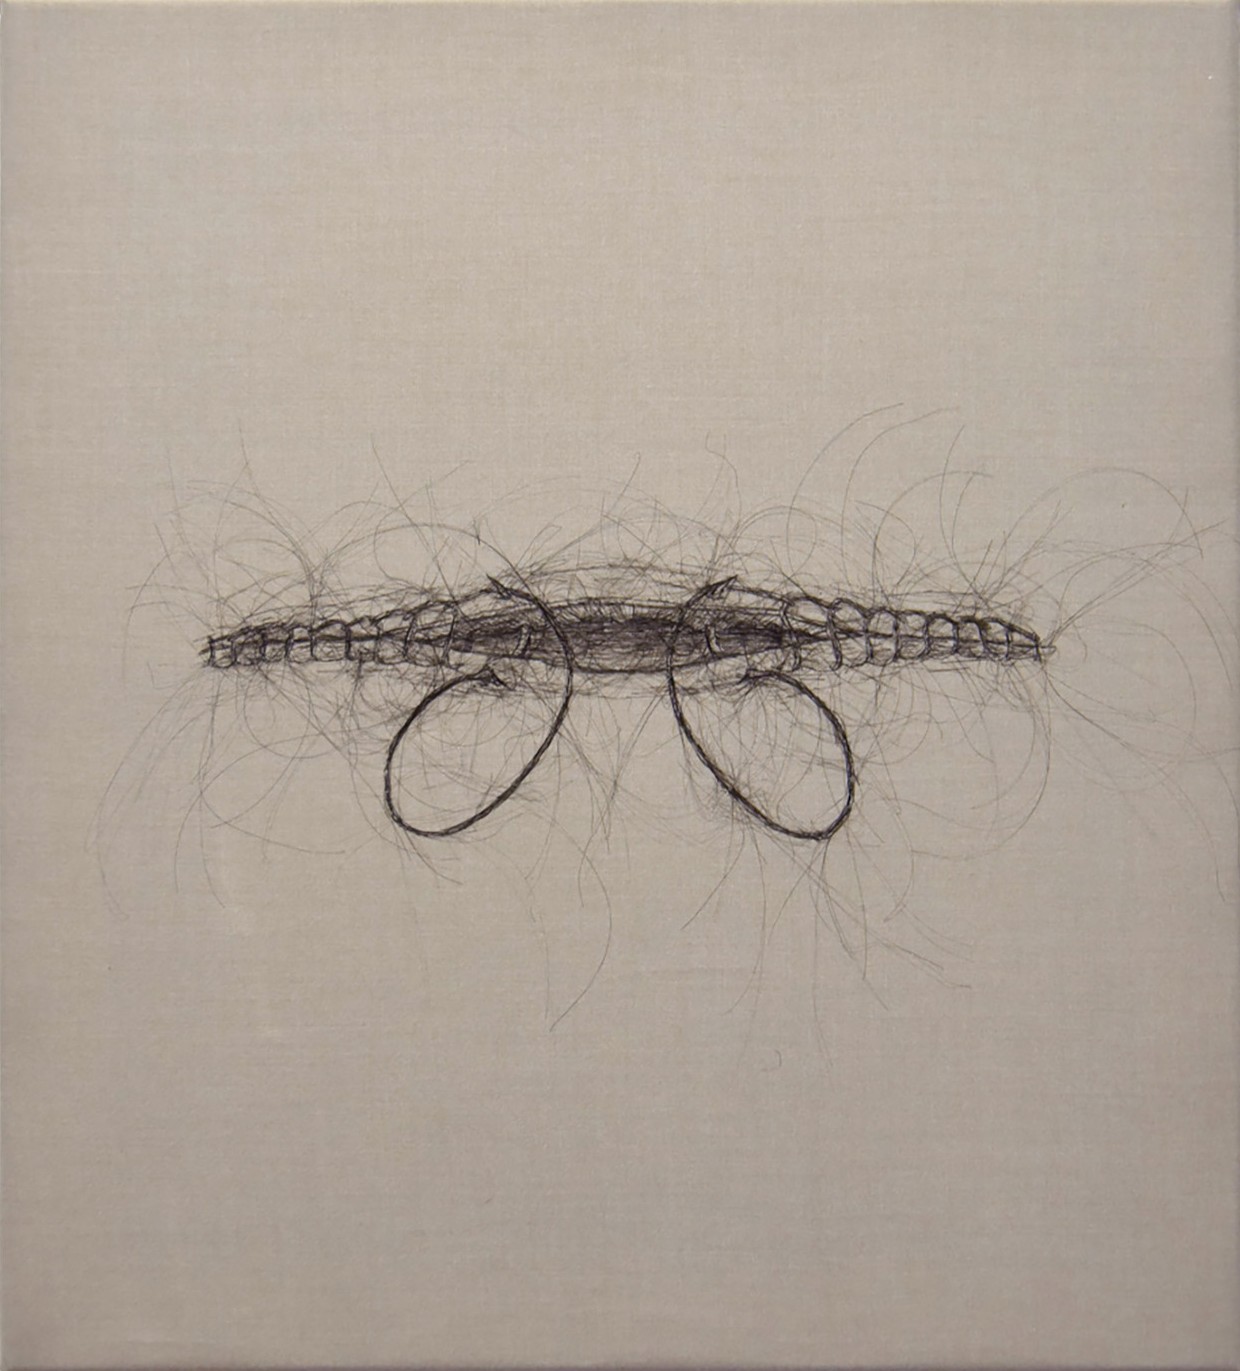 Angela Su. "Chain Stitch," from the "Sewing Together My Split Mind (2019-2021)" series. 2019.